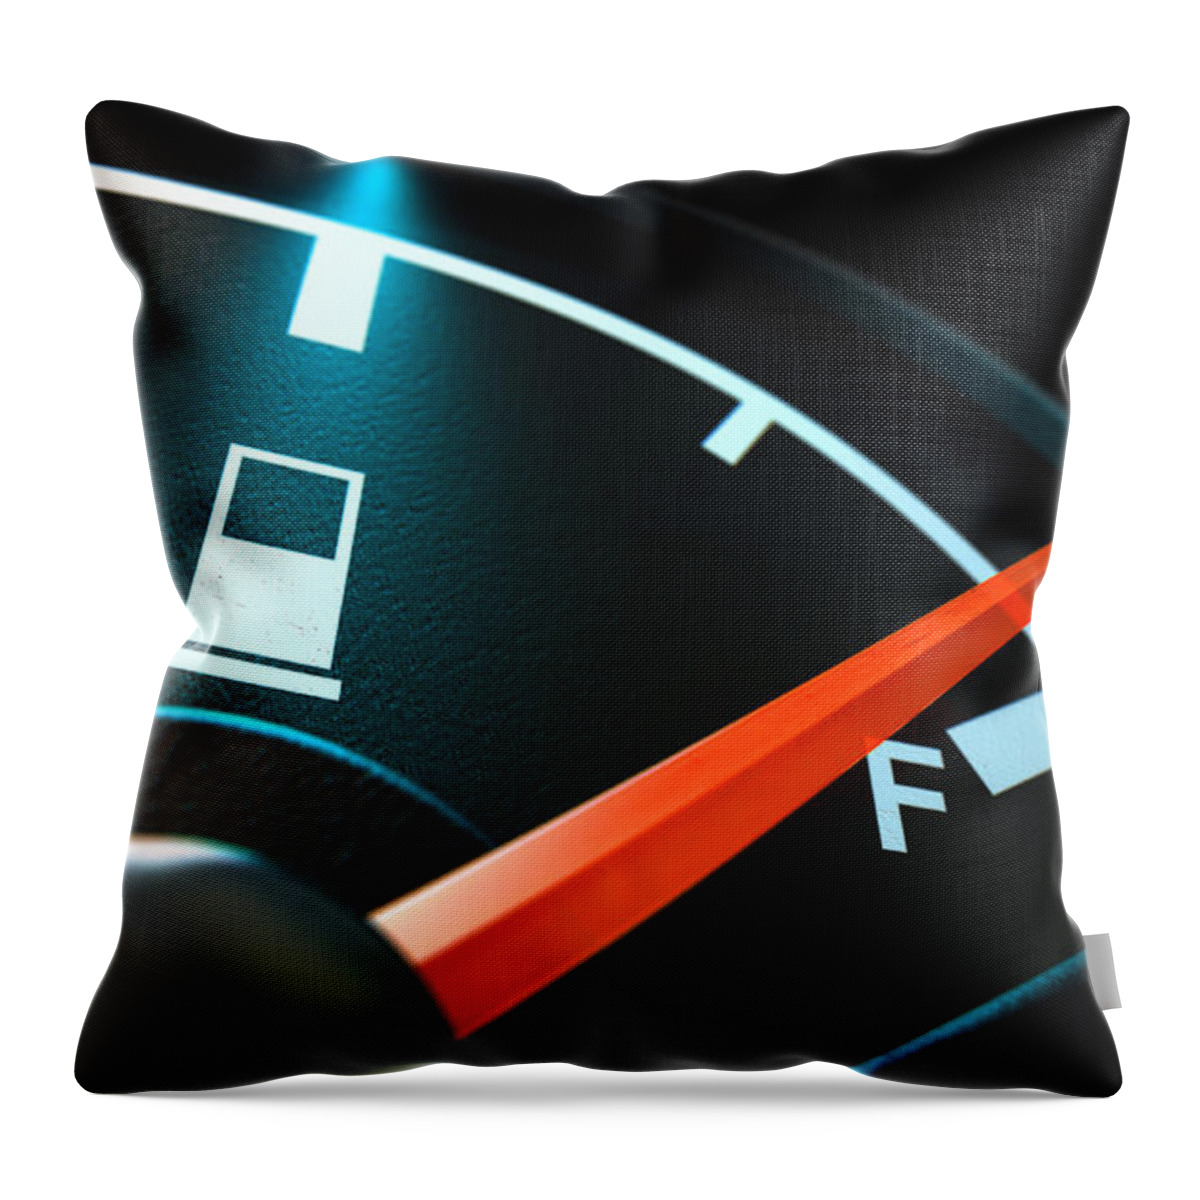 Fuel Throw Pillow featuring the digital art Gas Gage Illuminated Full by Allan Swart